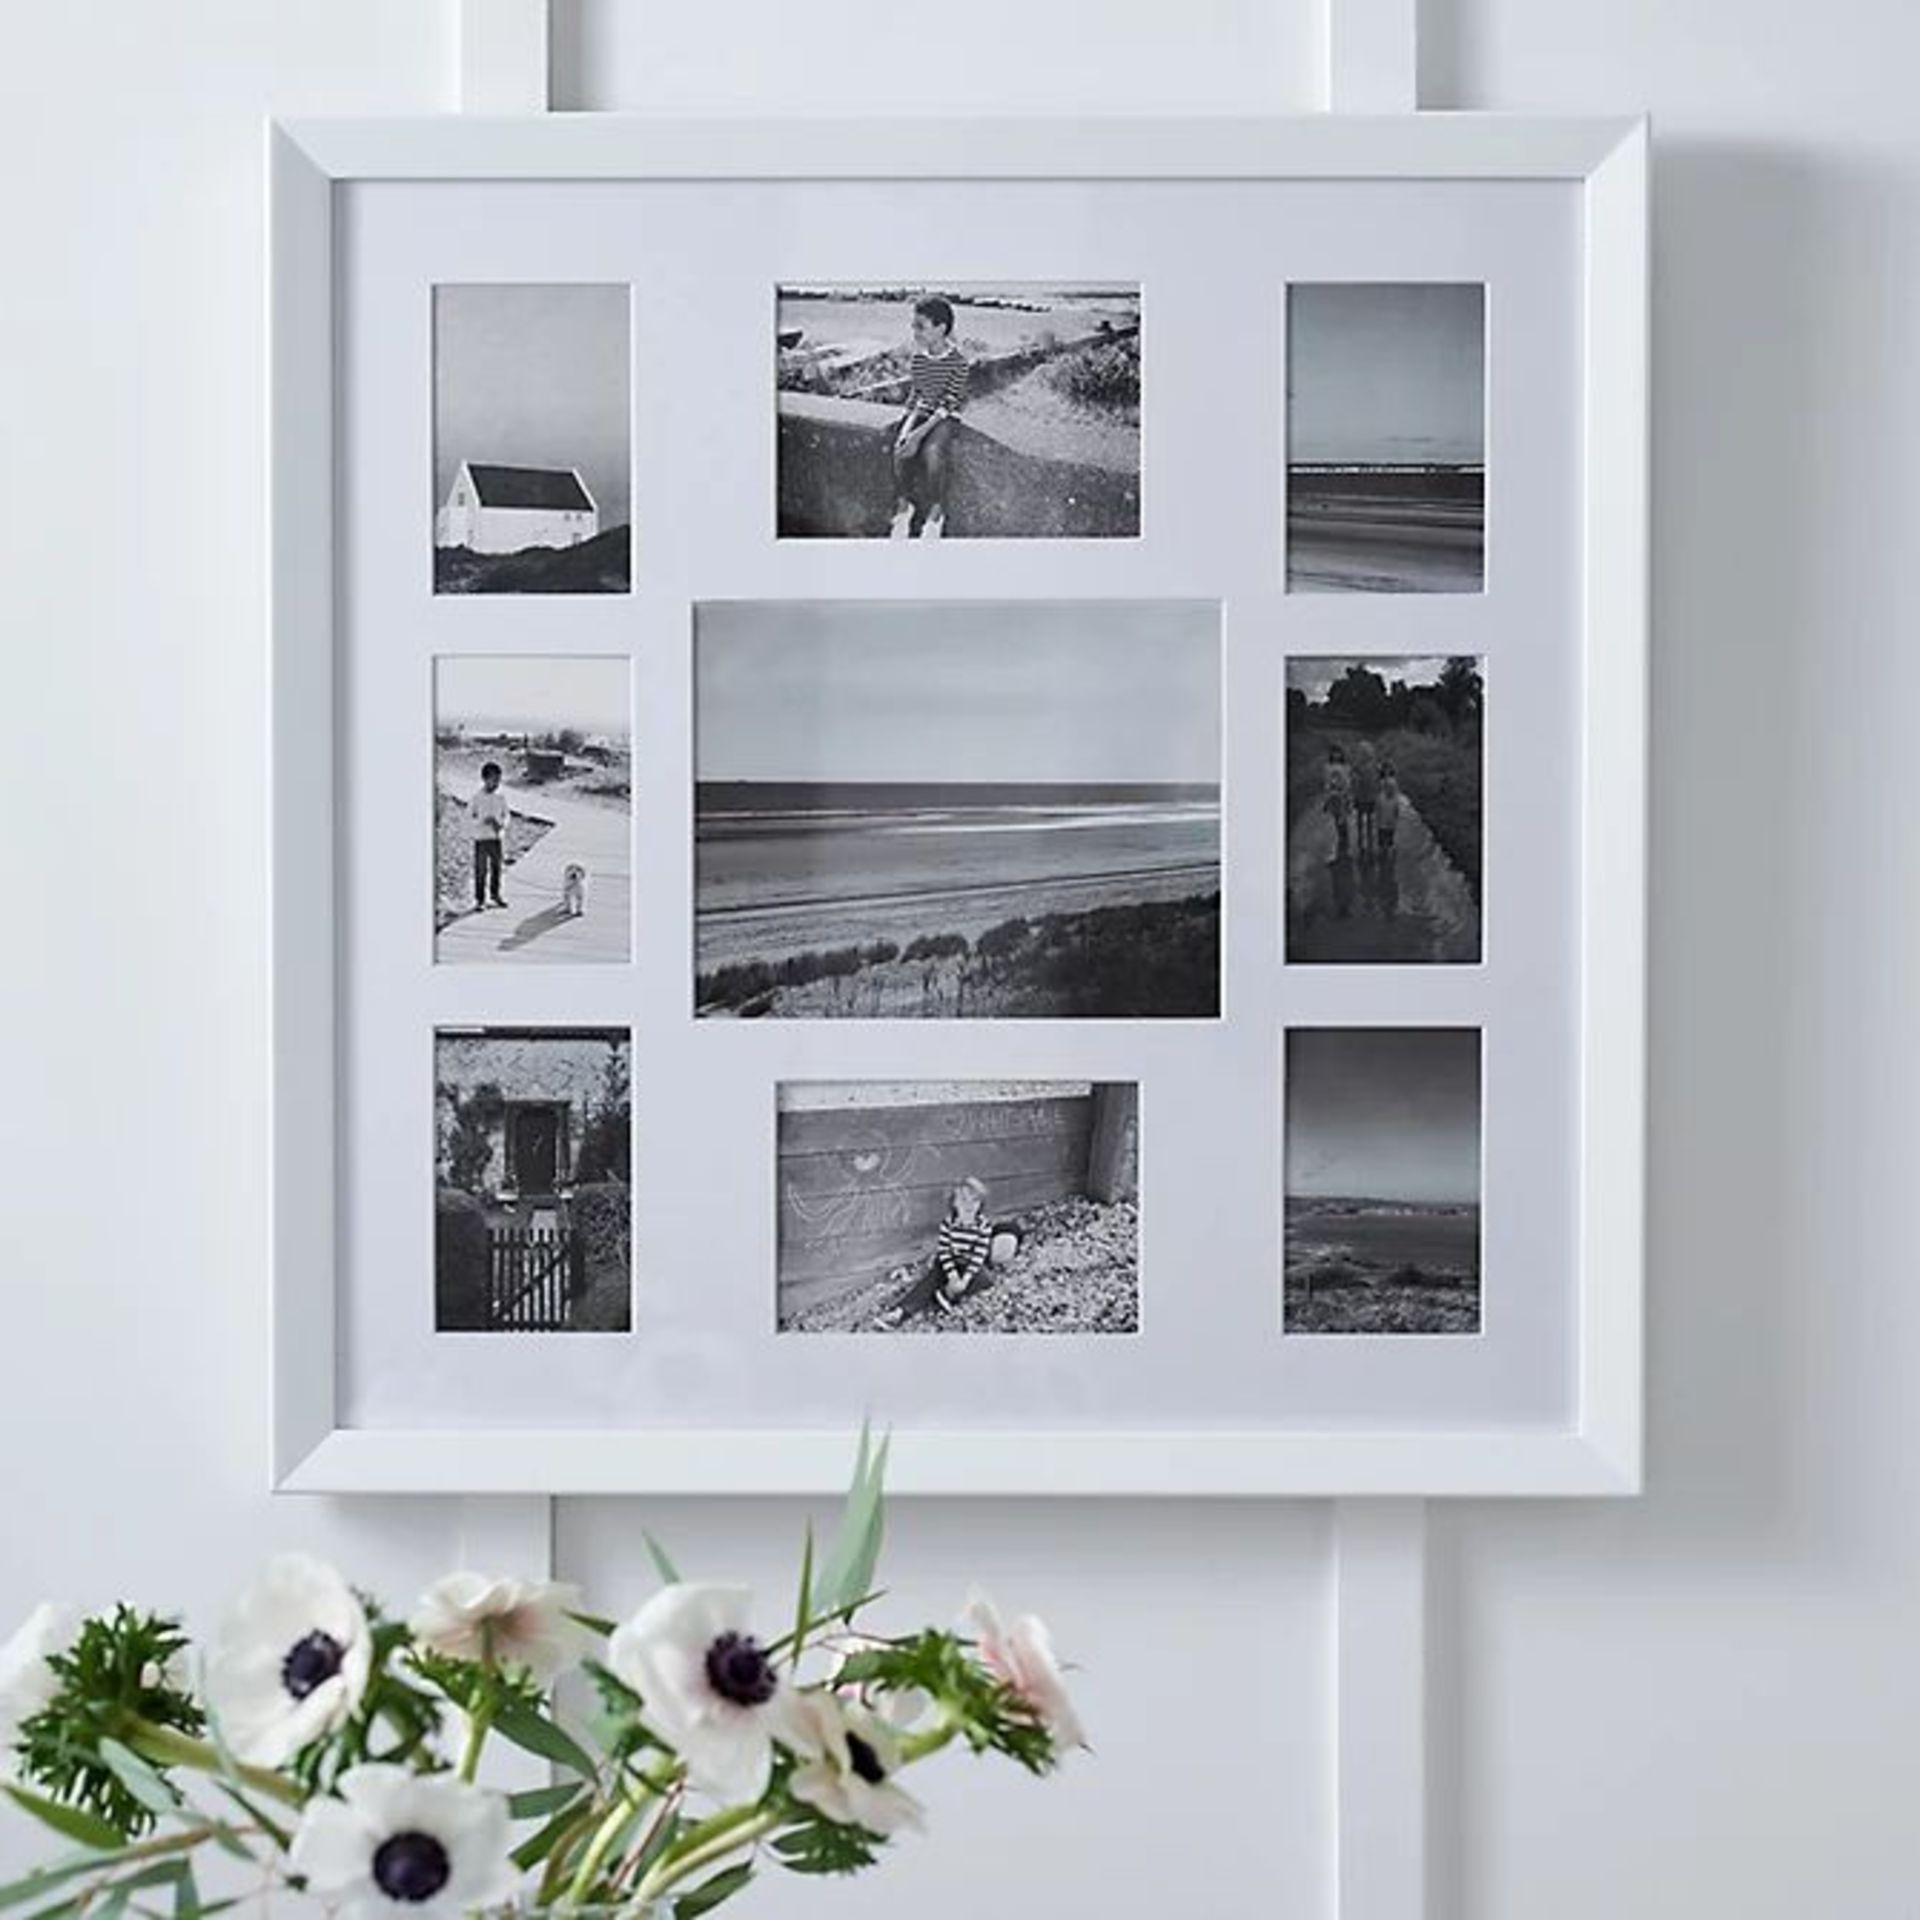 White Company 9 Aperture Wood Photo Frame. - R14.12. Our stylish and versatile wooden frame lets you